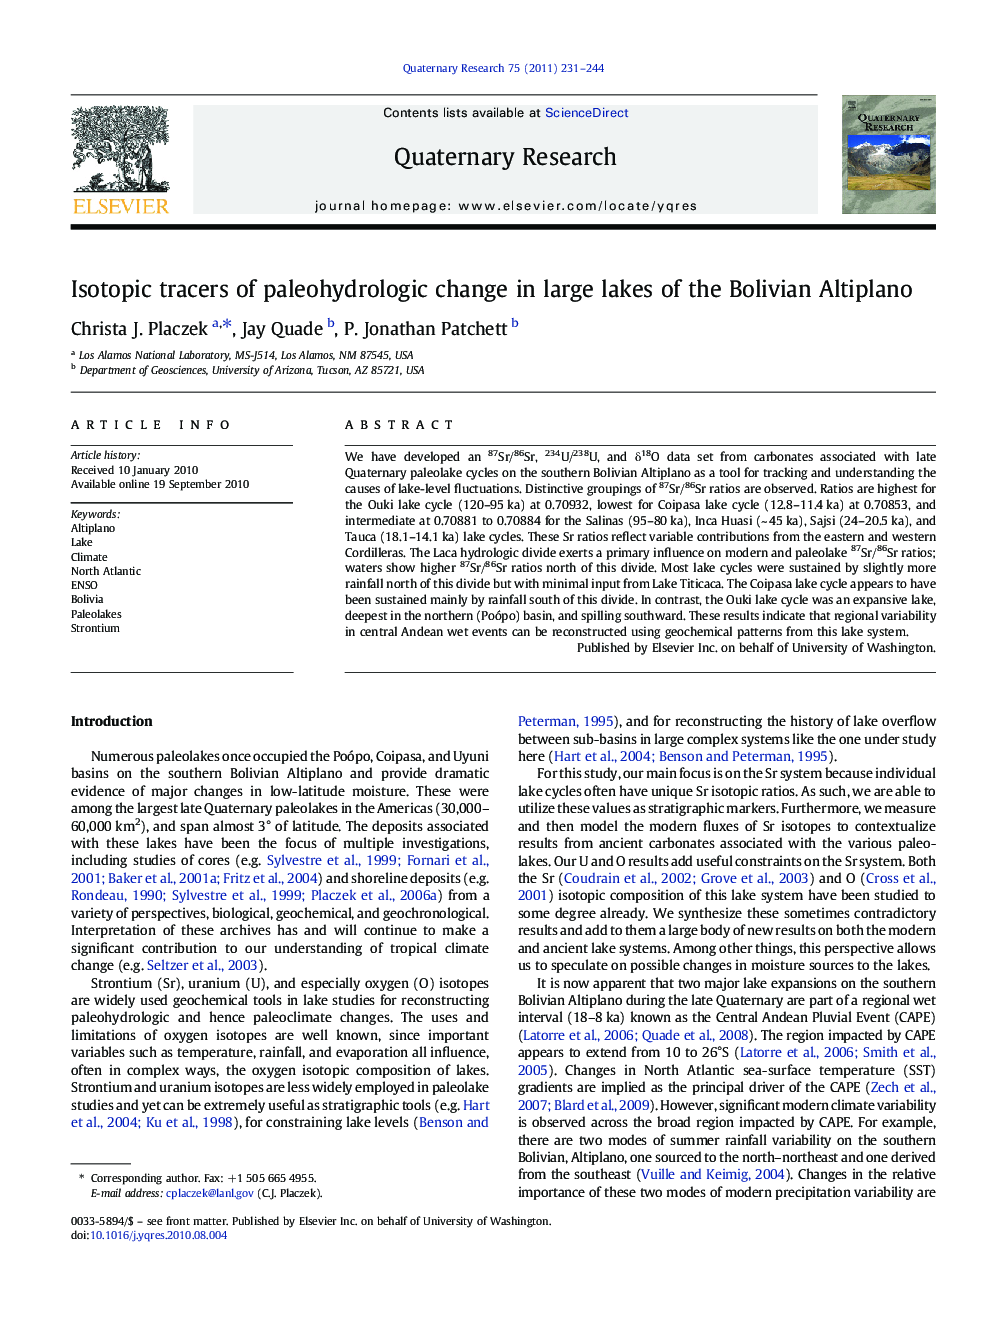 Isotopic tracers of paleohydrologic change in large lakes of the Bolivian Altiplano